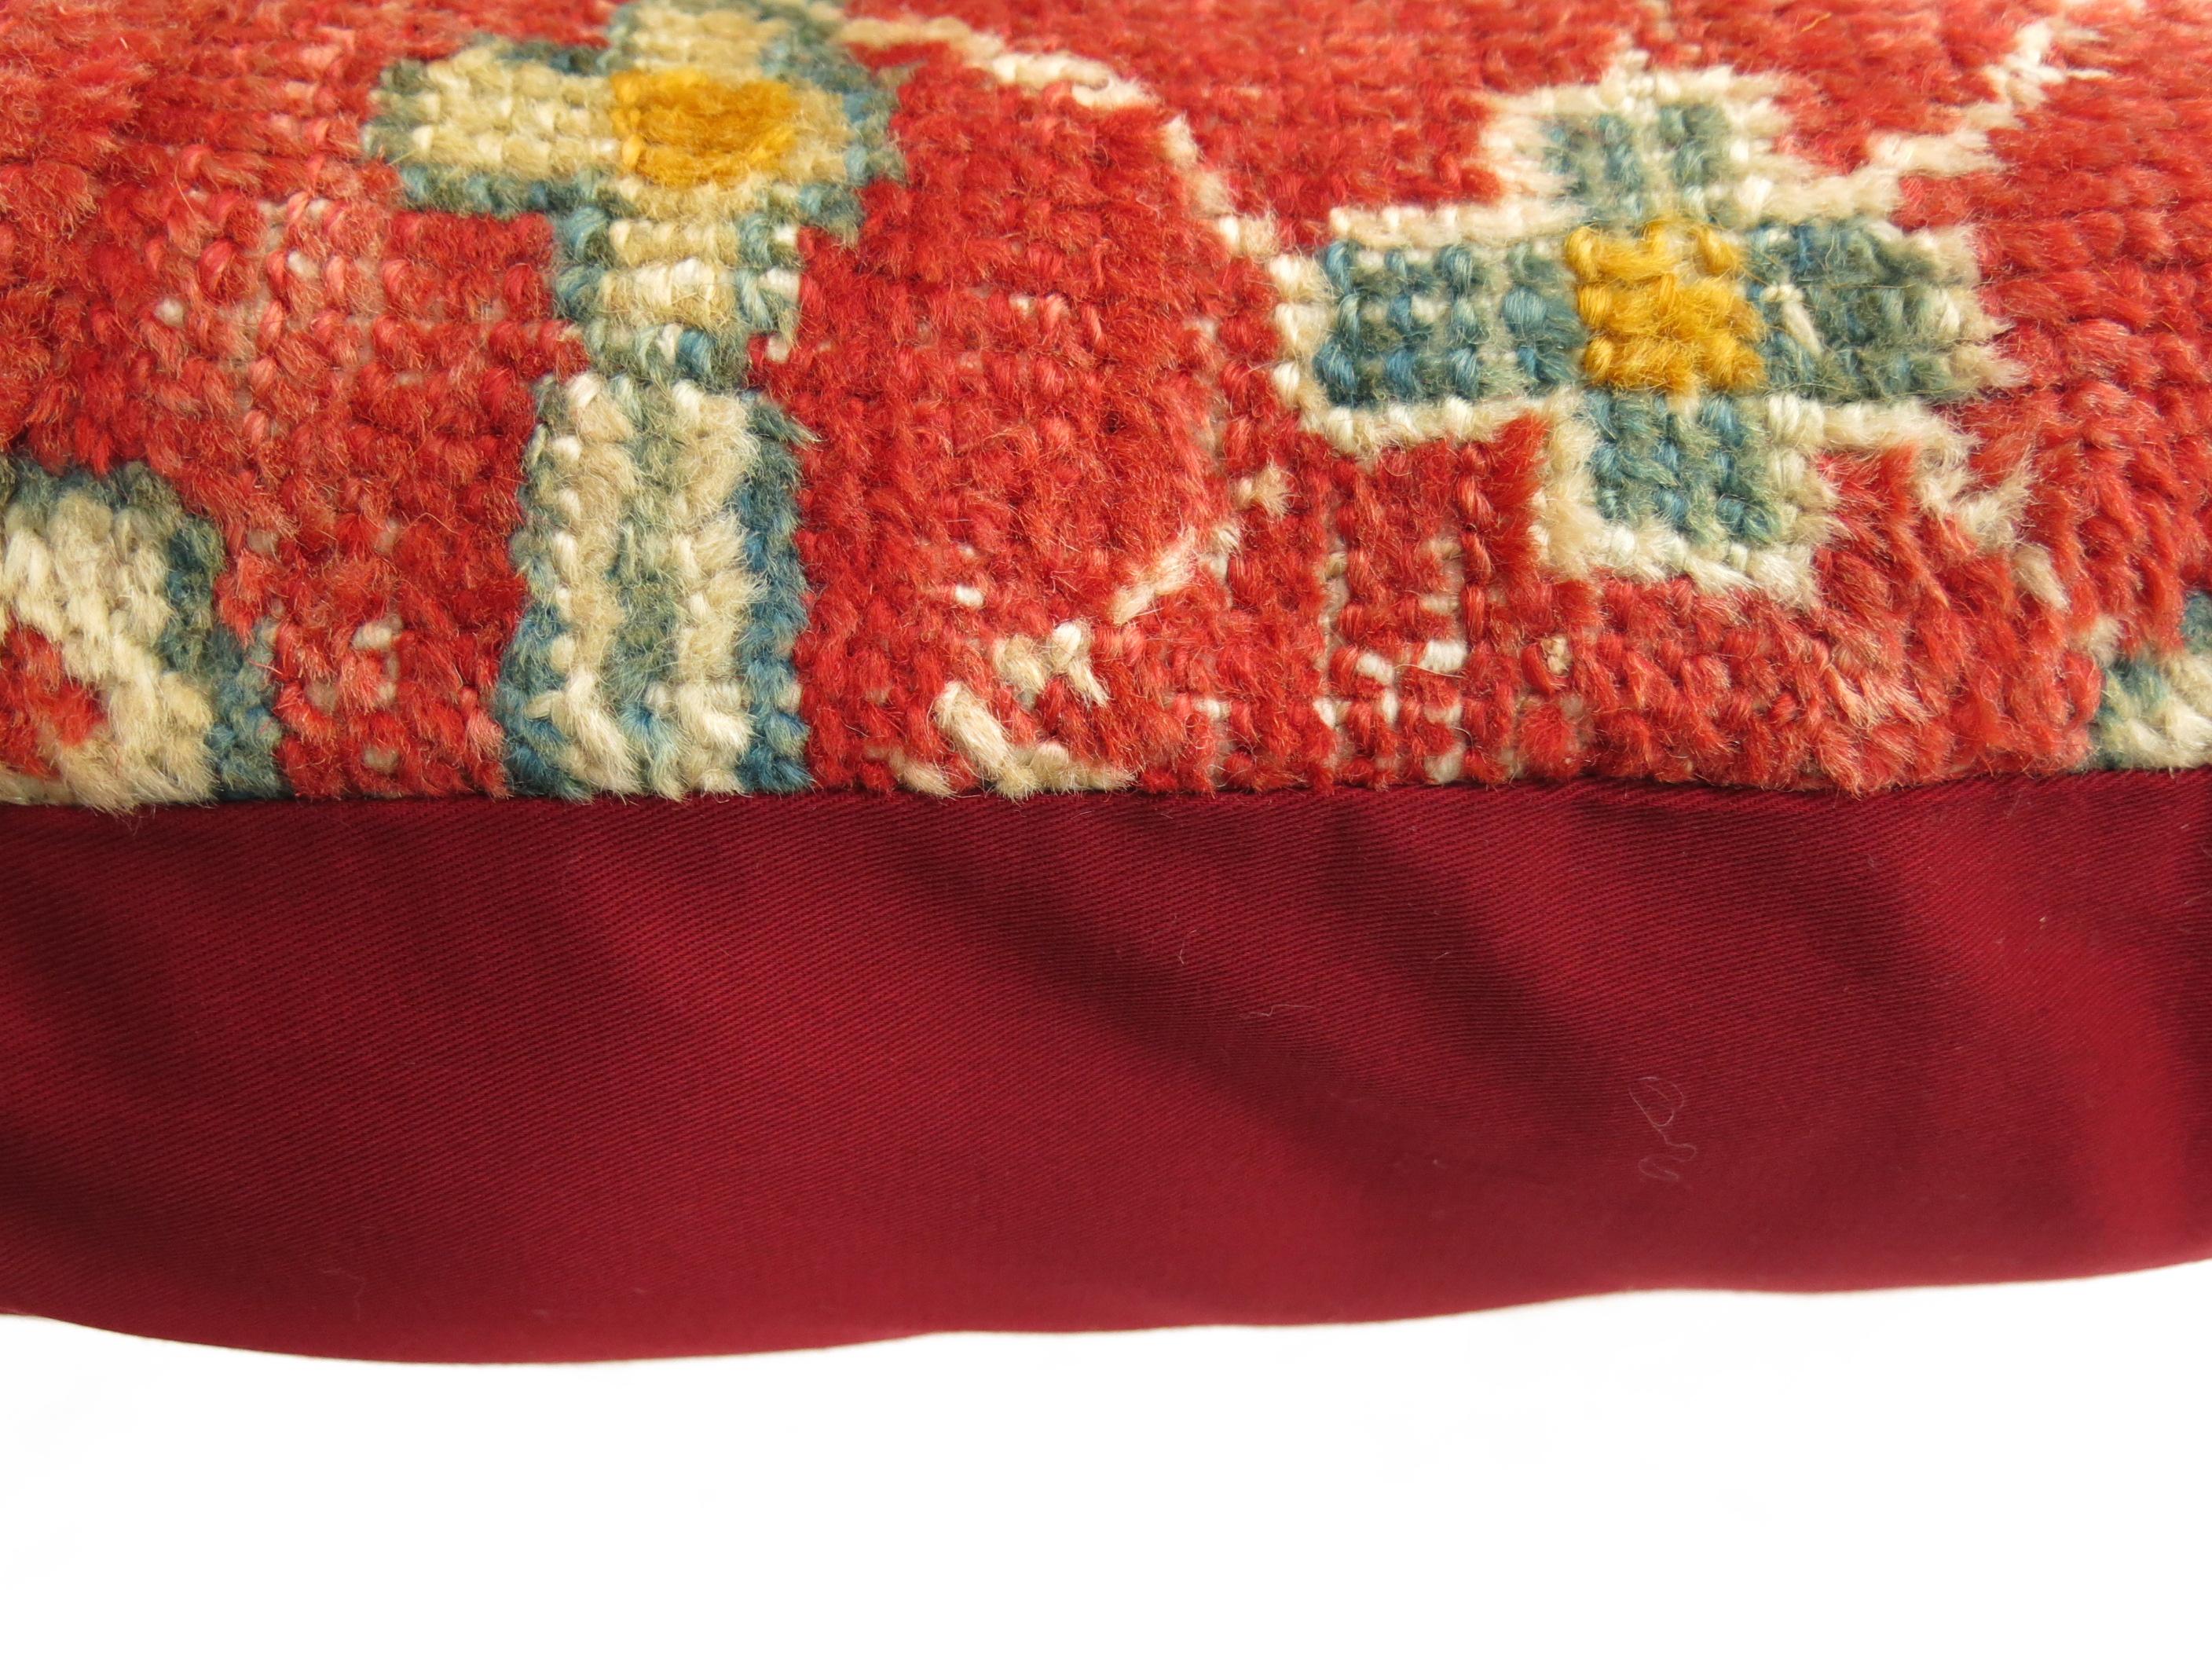 Pillow made from an early 20th century coral and gold color antique Oushak rug

Measures: 16